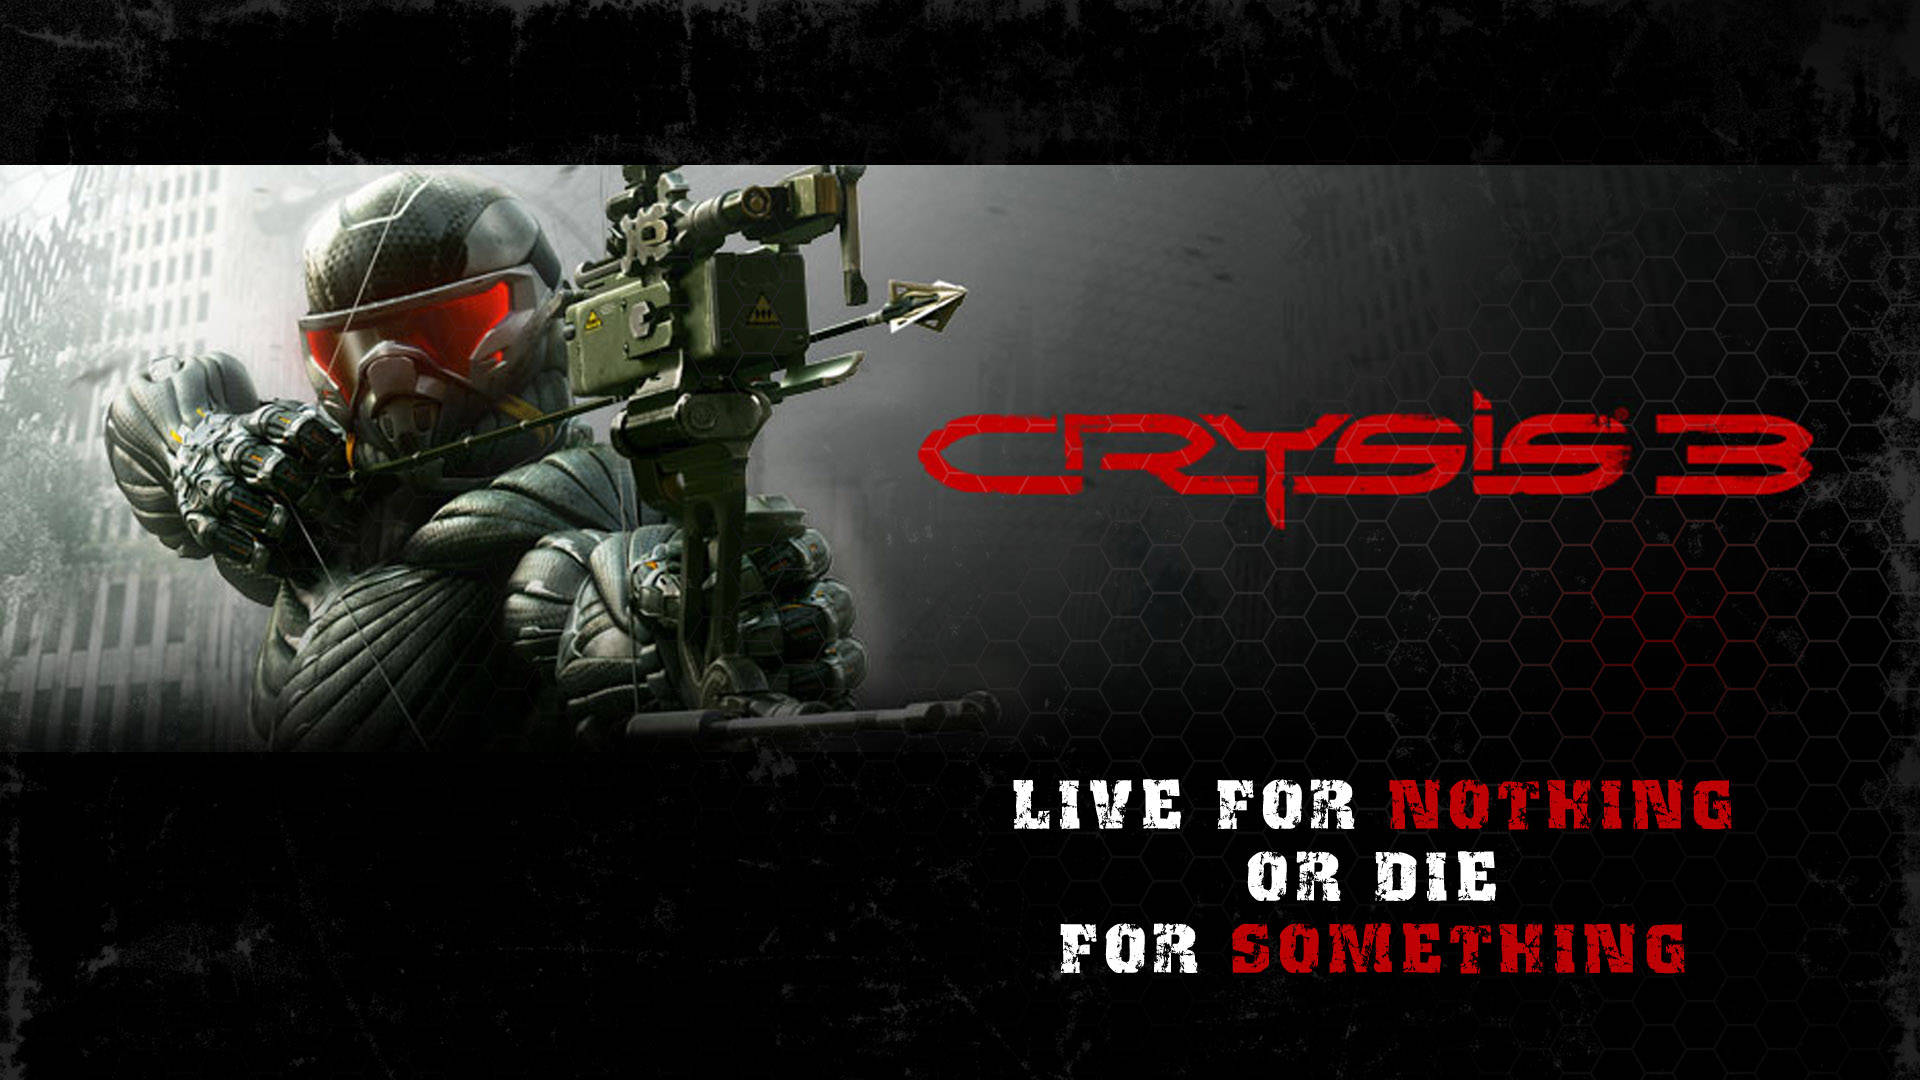 Crysis 3 Prophet And Quote Wallpaper